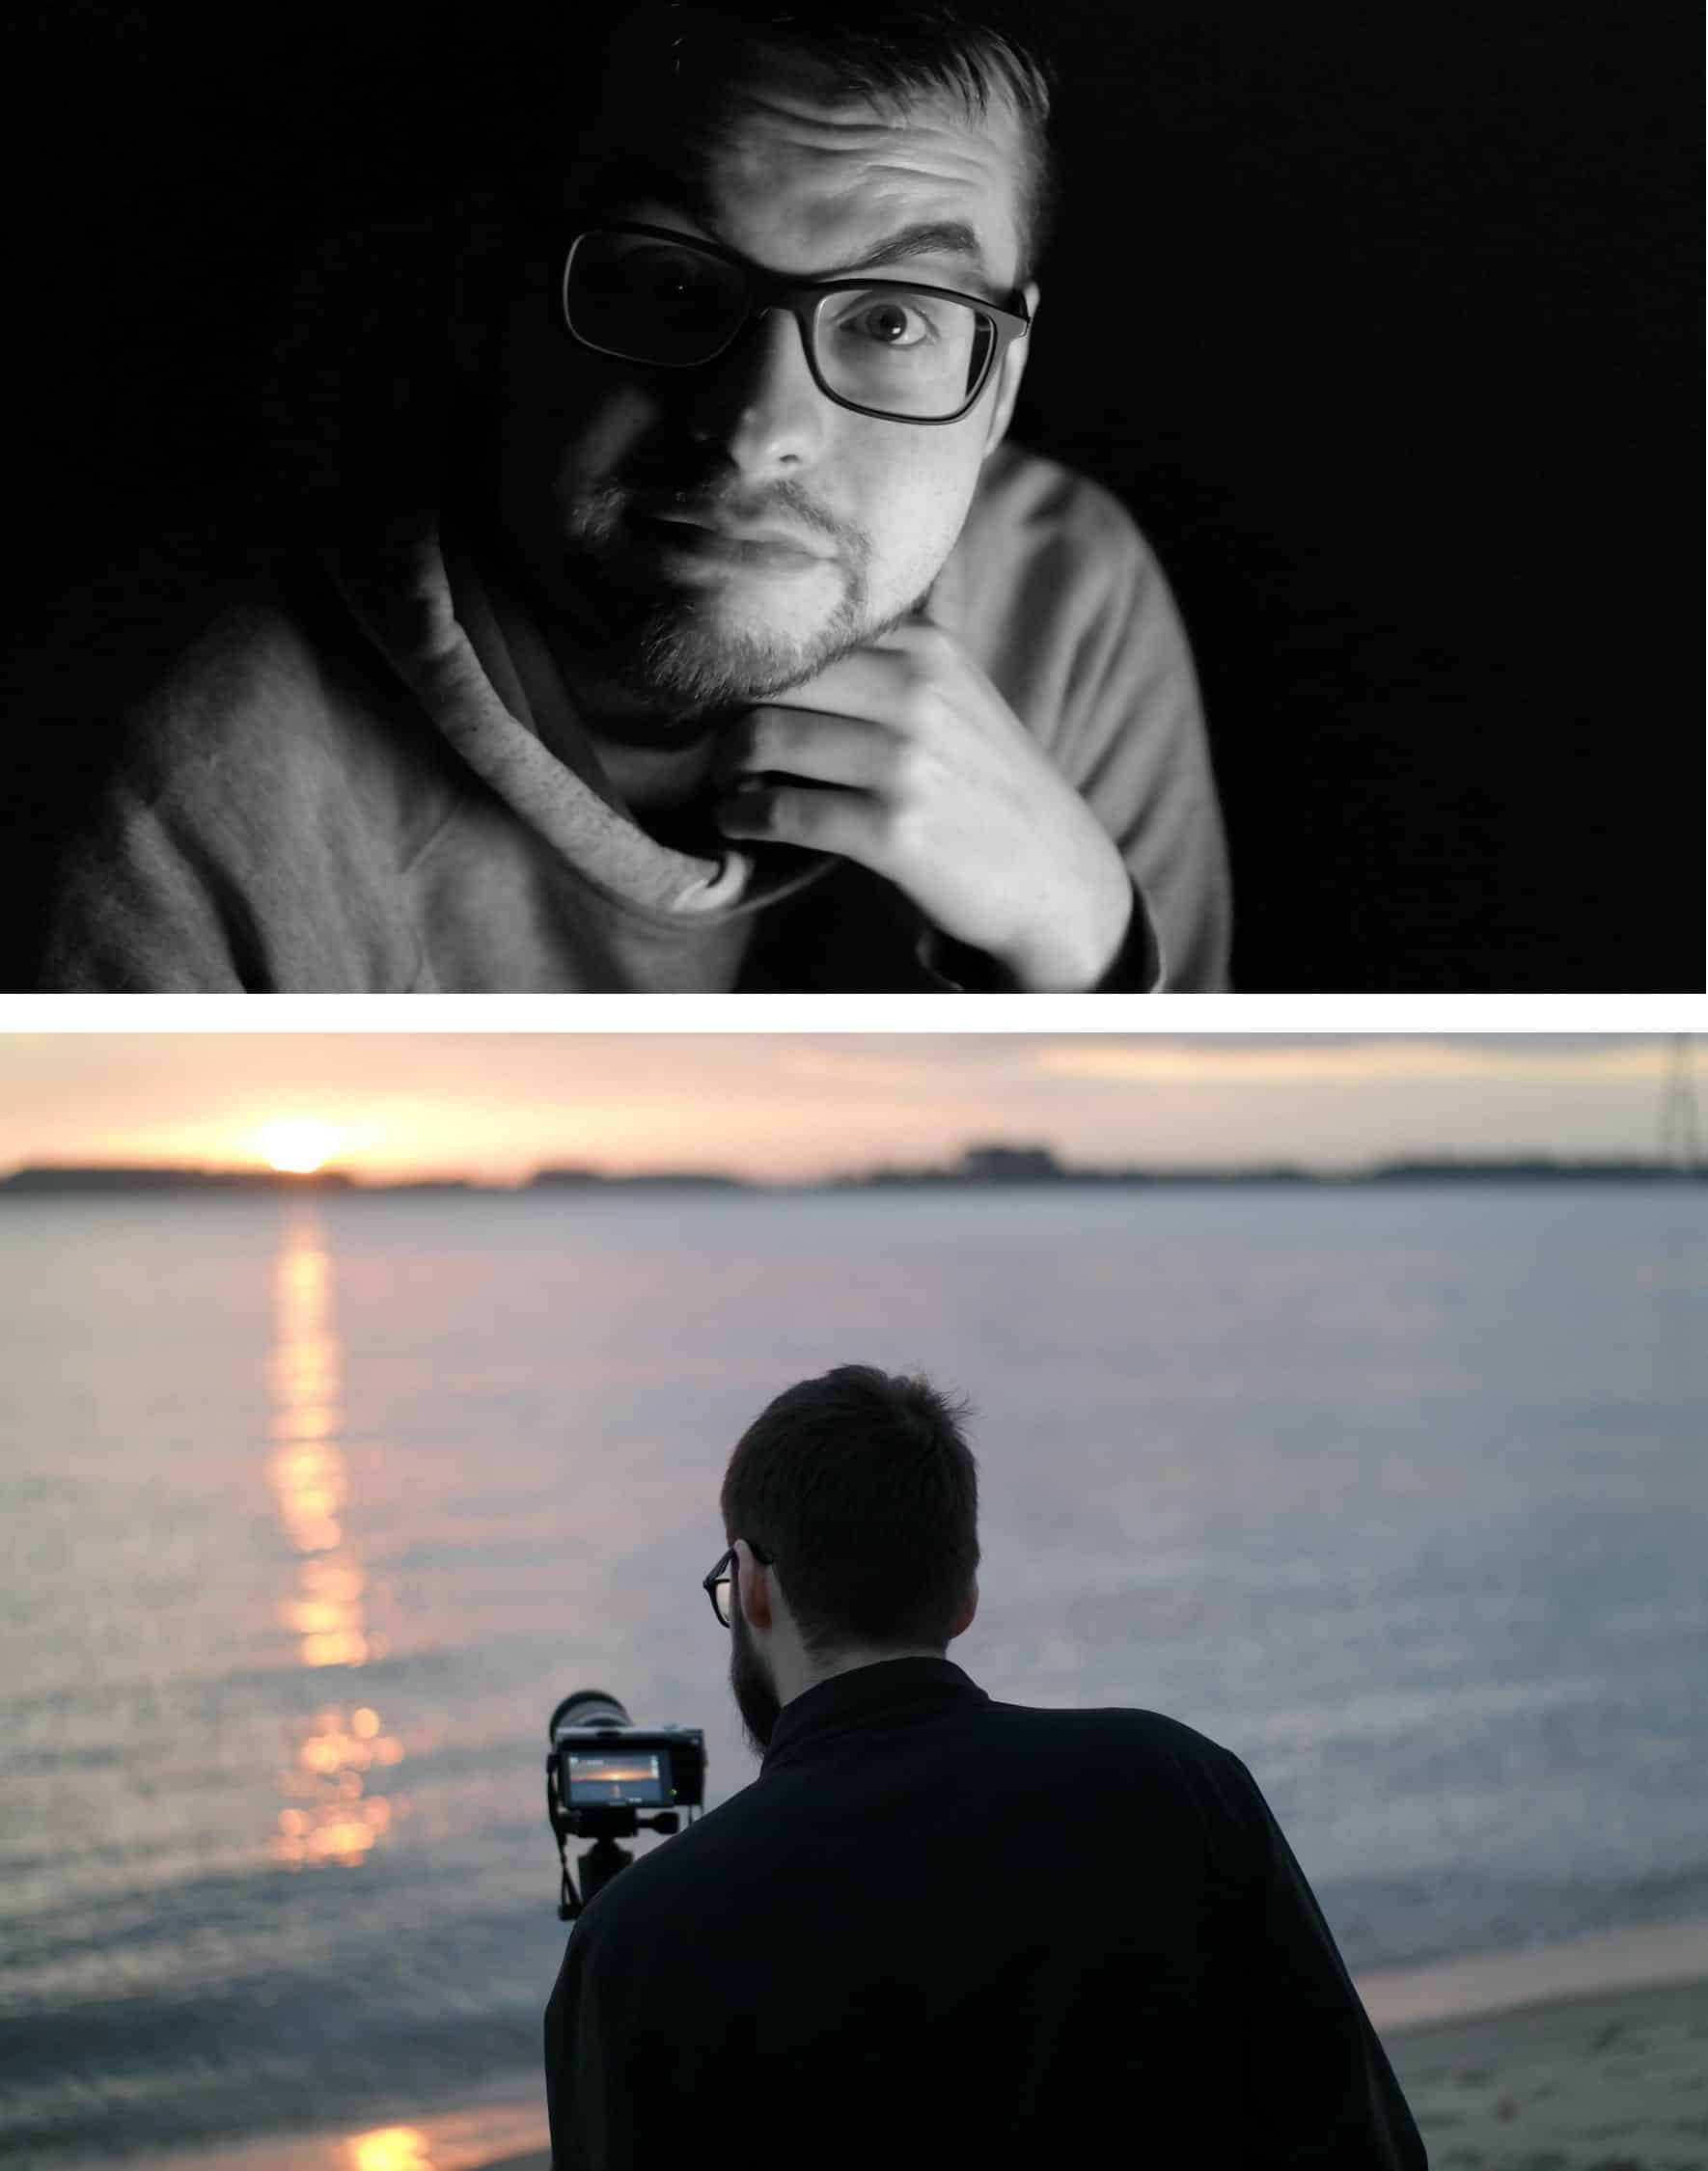 At the first image, Niklas is posing to the camera. The second image Niklas is holding a camera and taking a picture of the beautiful sunset.